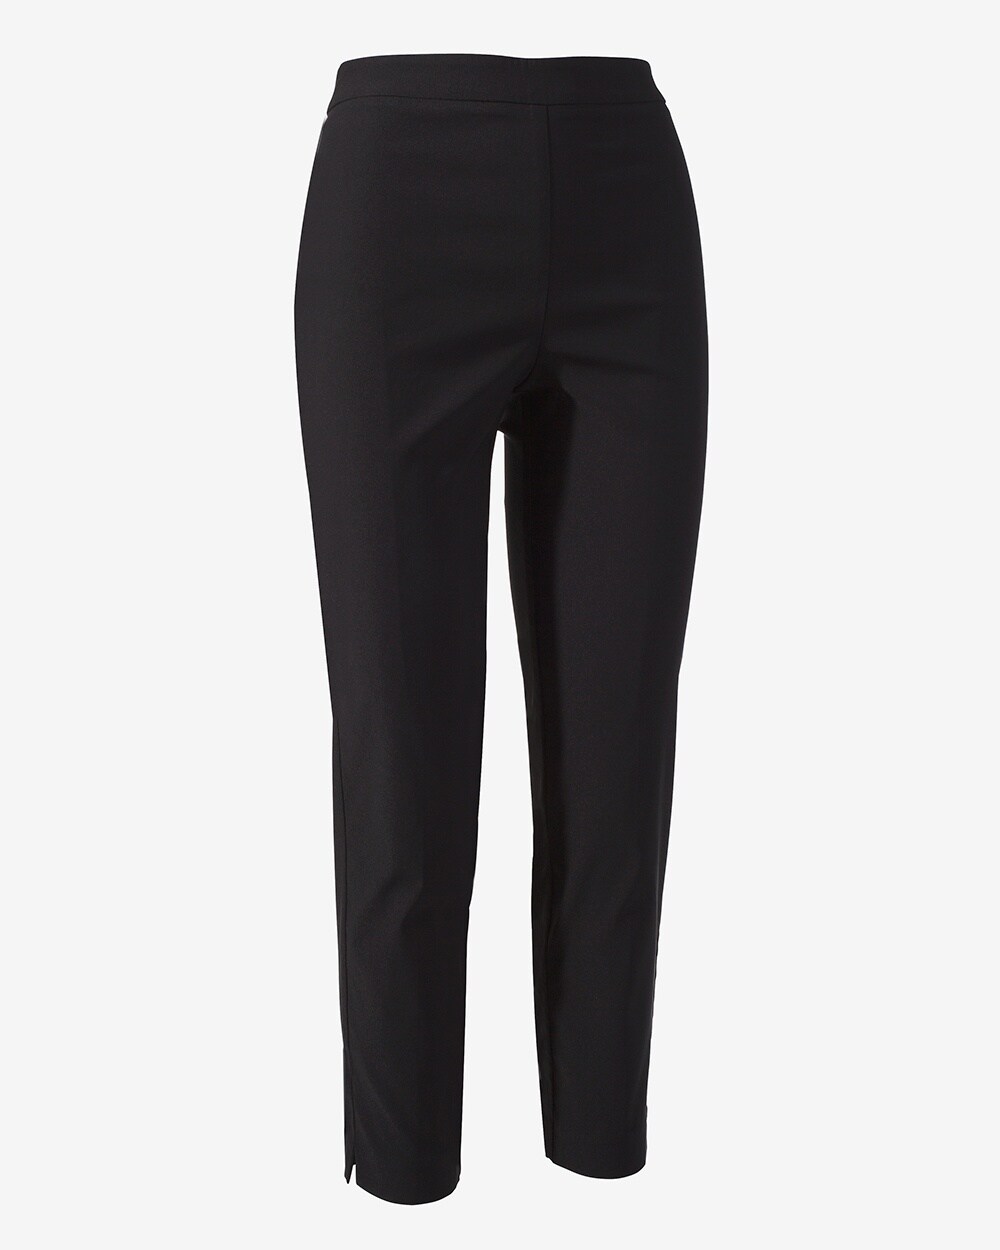 Perfect Stretch Marveluxe Side-Zip Ankle Pants